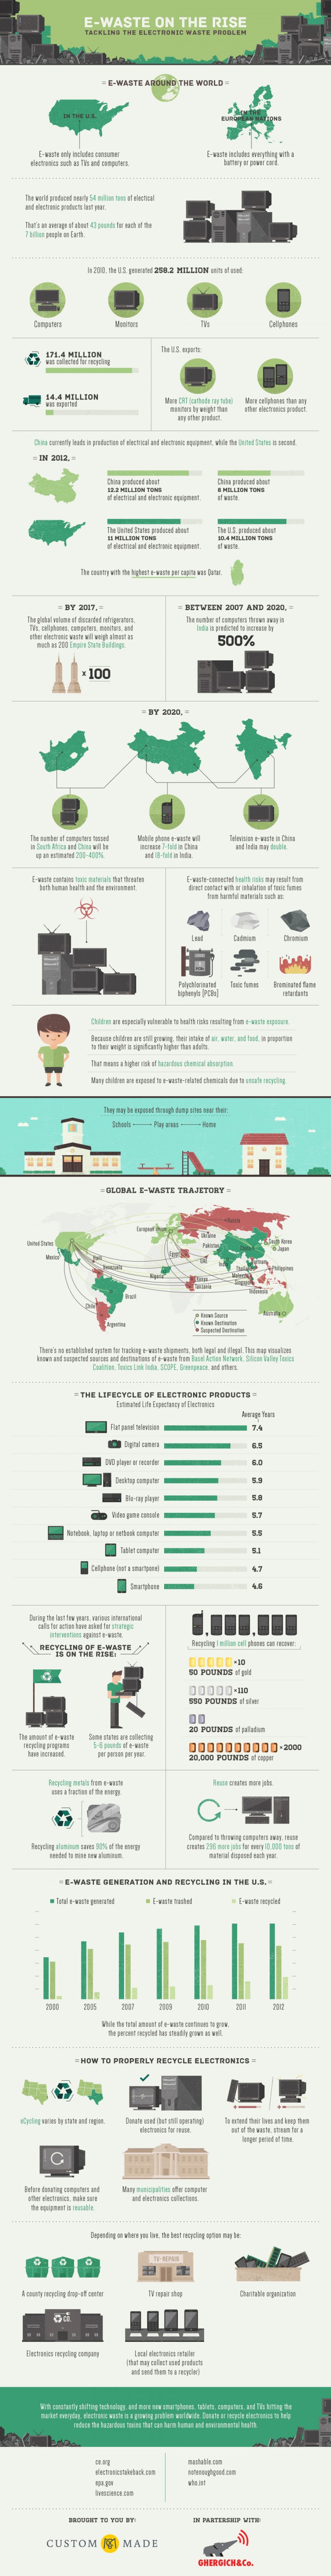 E-waste on the Rise Infographic